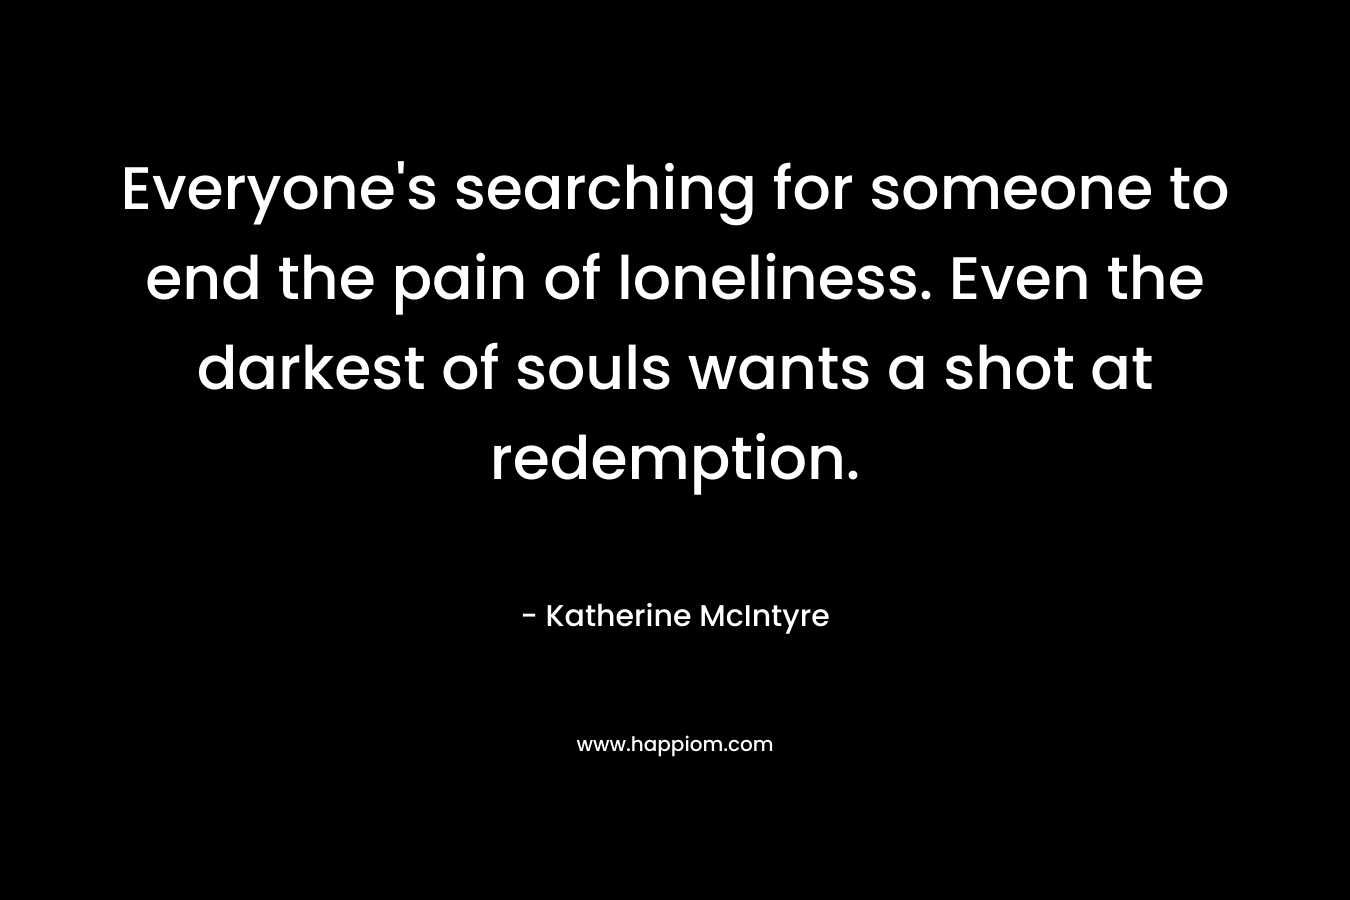 Everyone's searching for someone to end the pain of loneliness. Even the darkest of souls wants a shot at redemption.